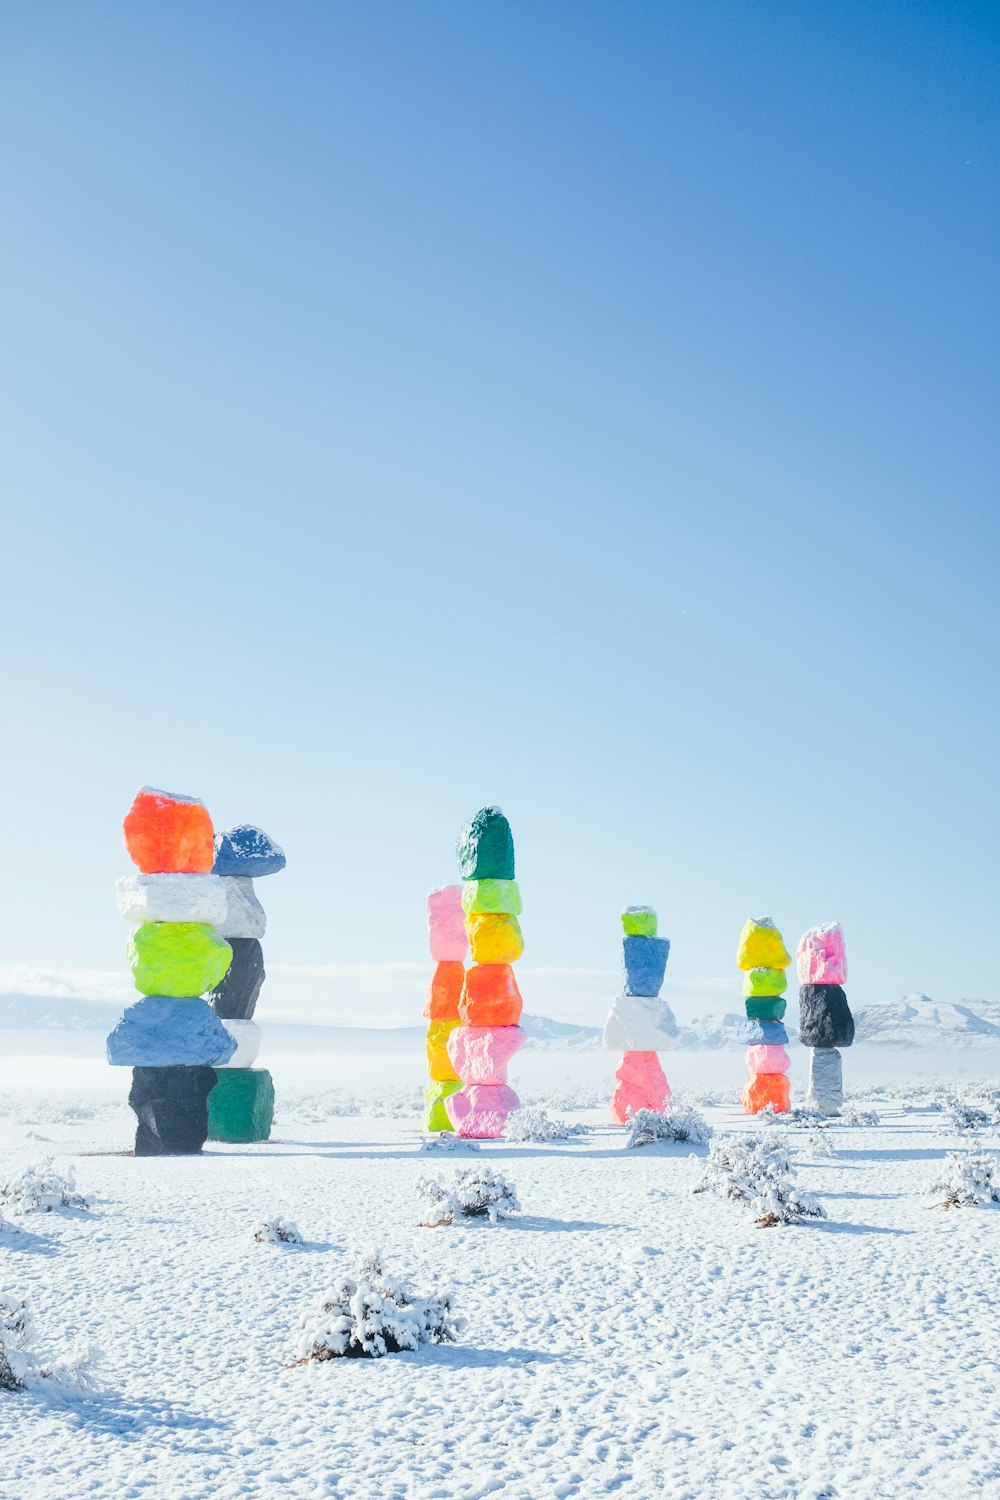 a group of colorful sculptures in the snow